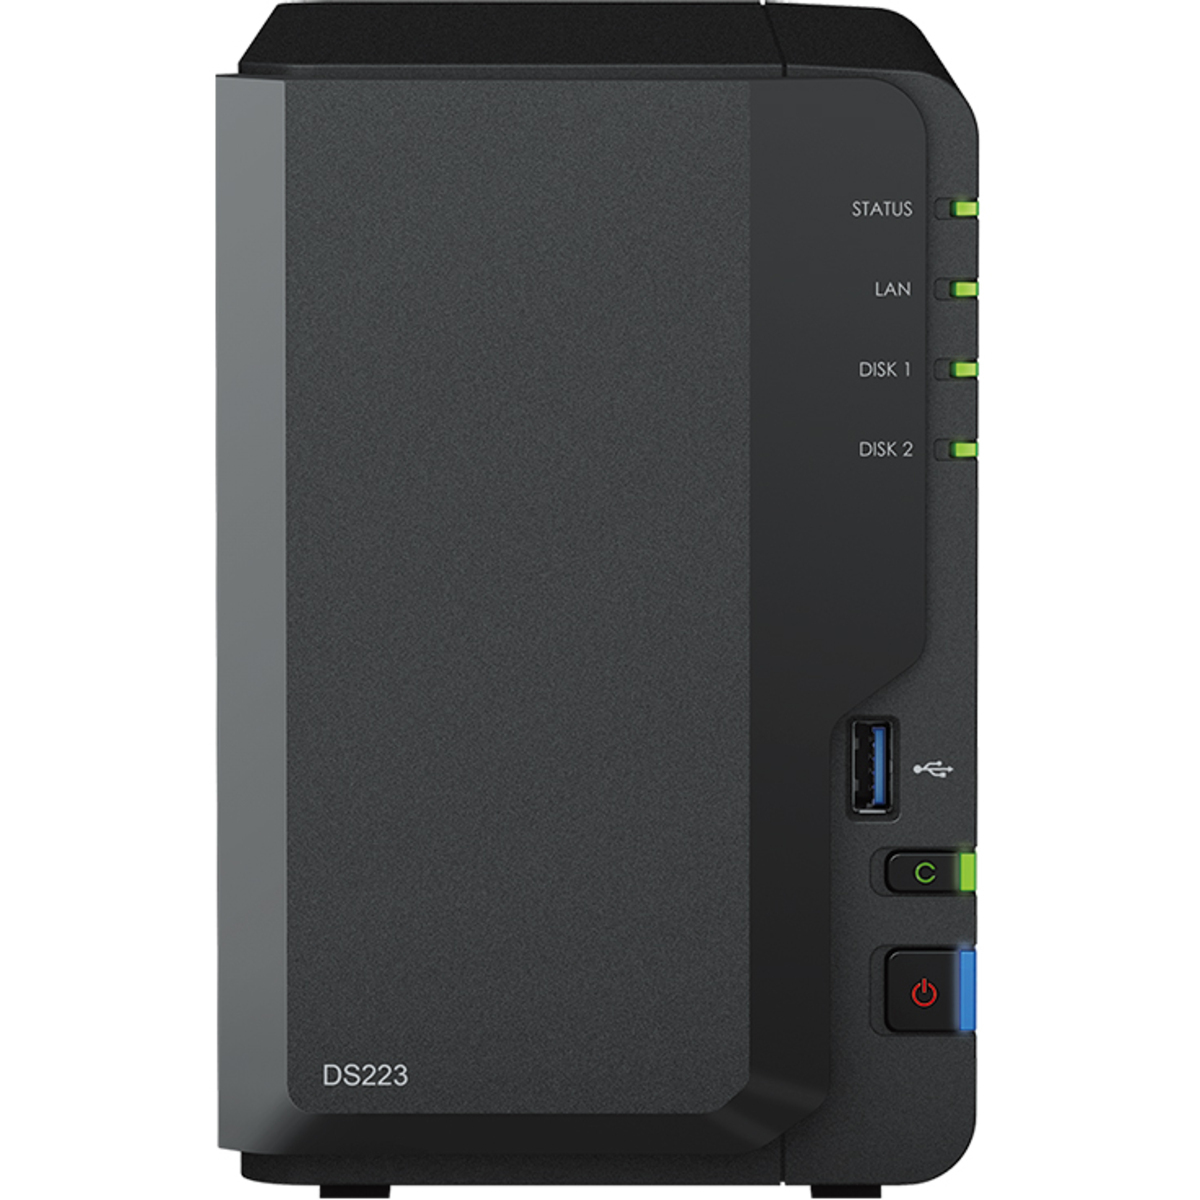 Synology DiskStation DS223 10tb 2-Bay Desktop Personal / Basic Home / Small Office NAS - Network Attached Storage Device 1x10tb Western Digital Gold WD102KRYZ 3.5 7200rpm SATA 6Gb/s HDD ENTERPRISE Class Drives Installed - Burn-In Tested DiskStation DS223